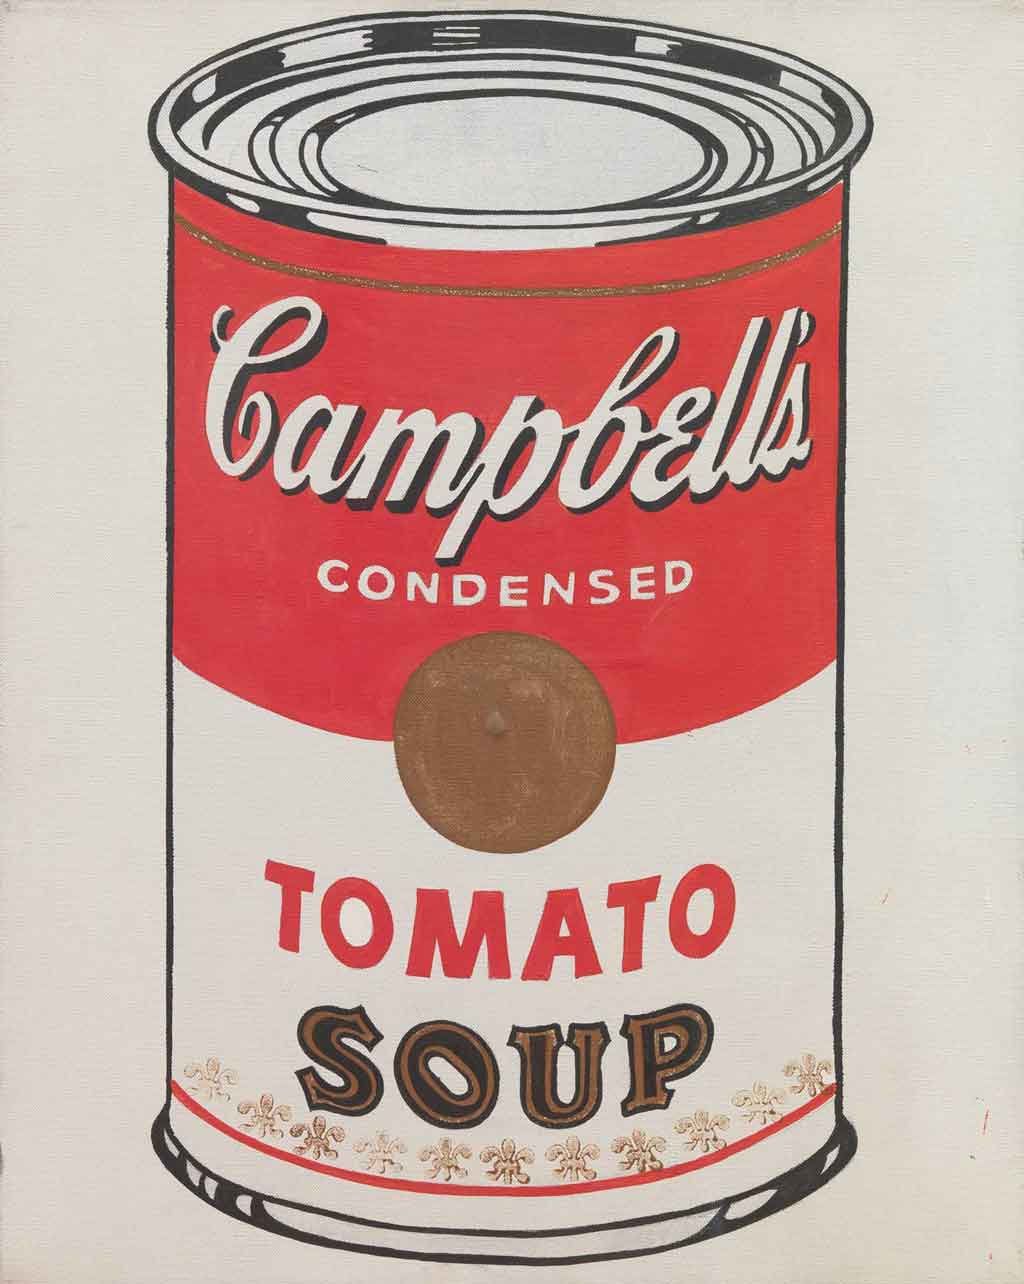 soup can branding and packaging art